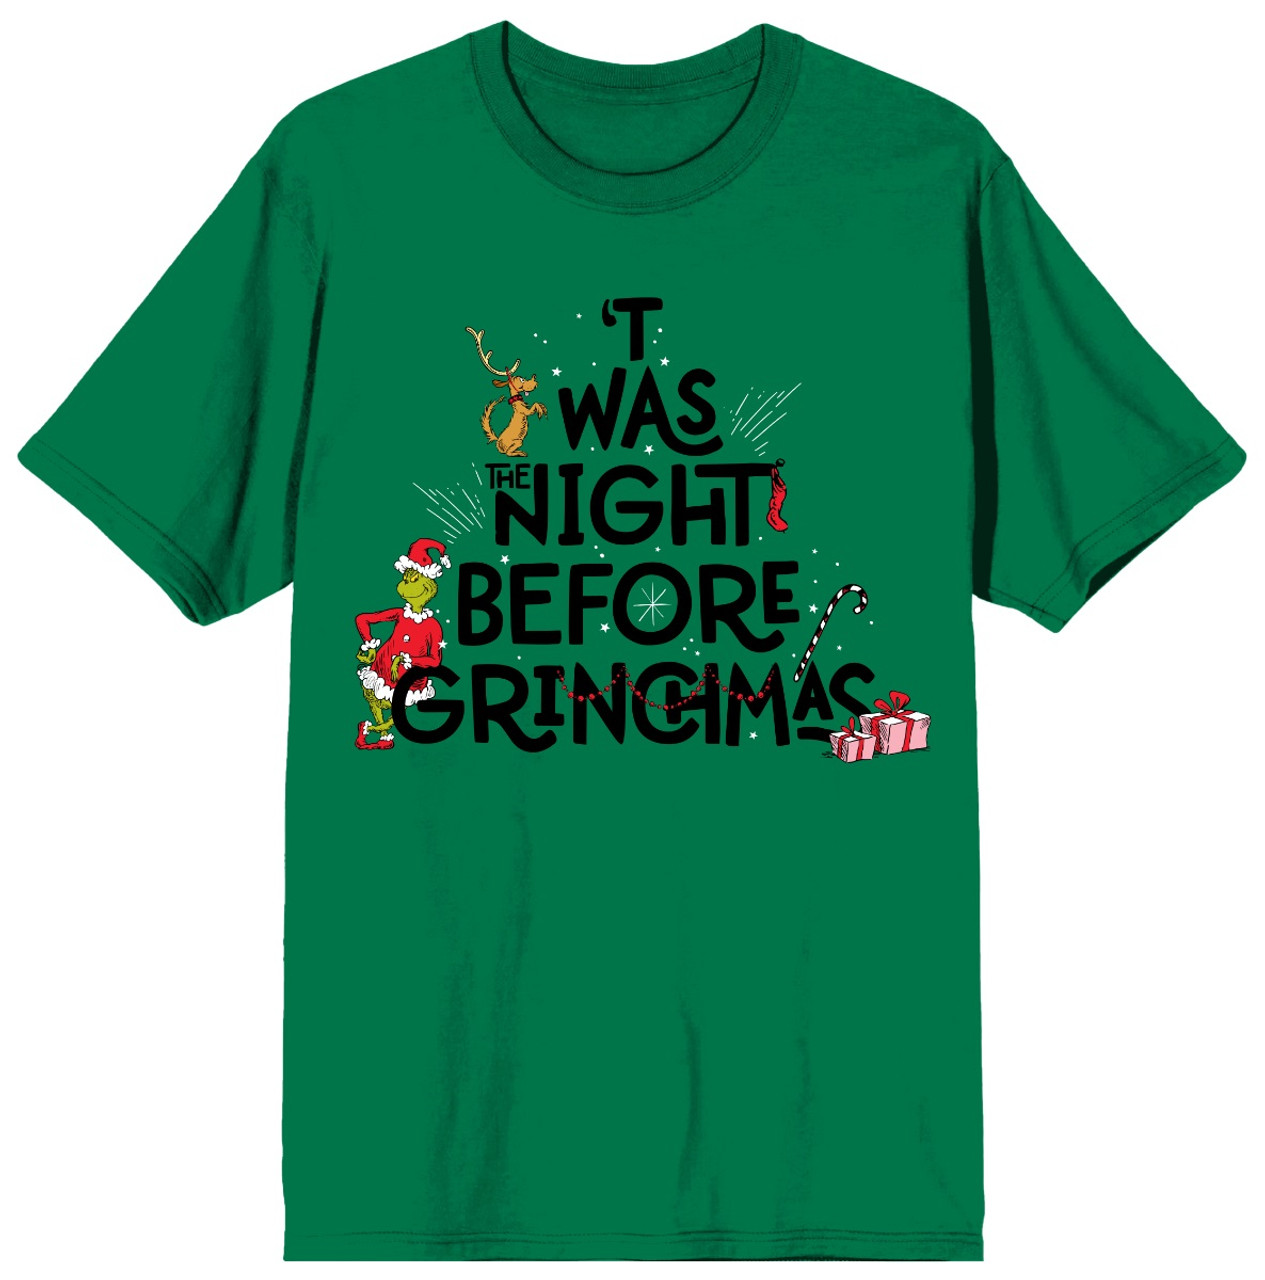 Twas the Night Before Grinchmas T-Shirt featuring The Grinch 